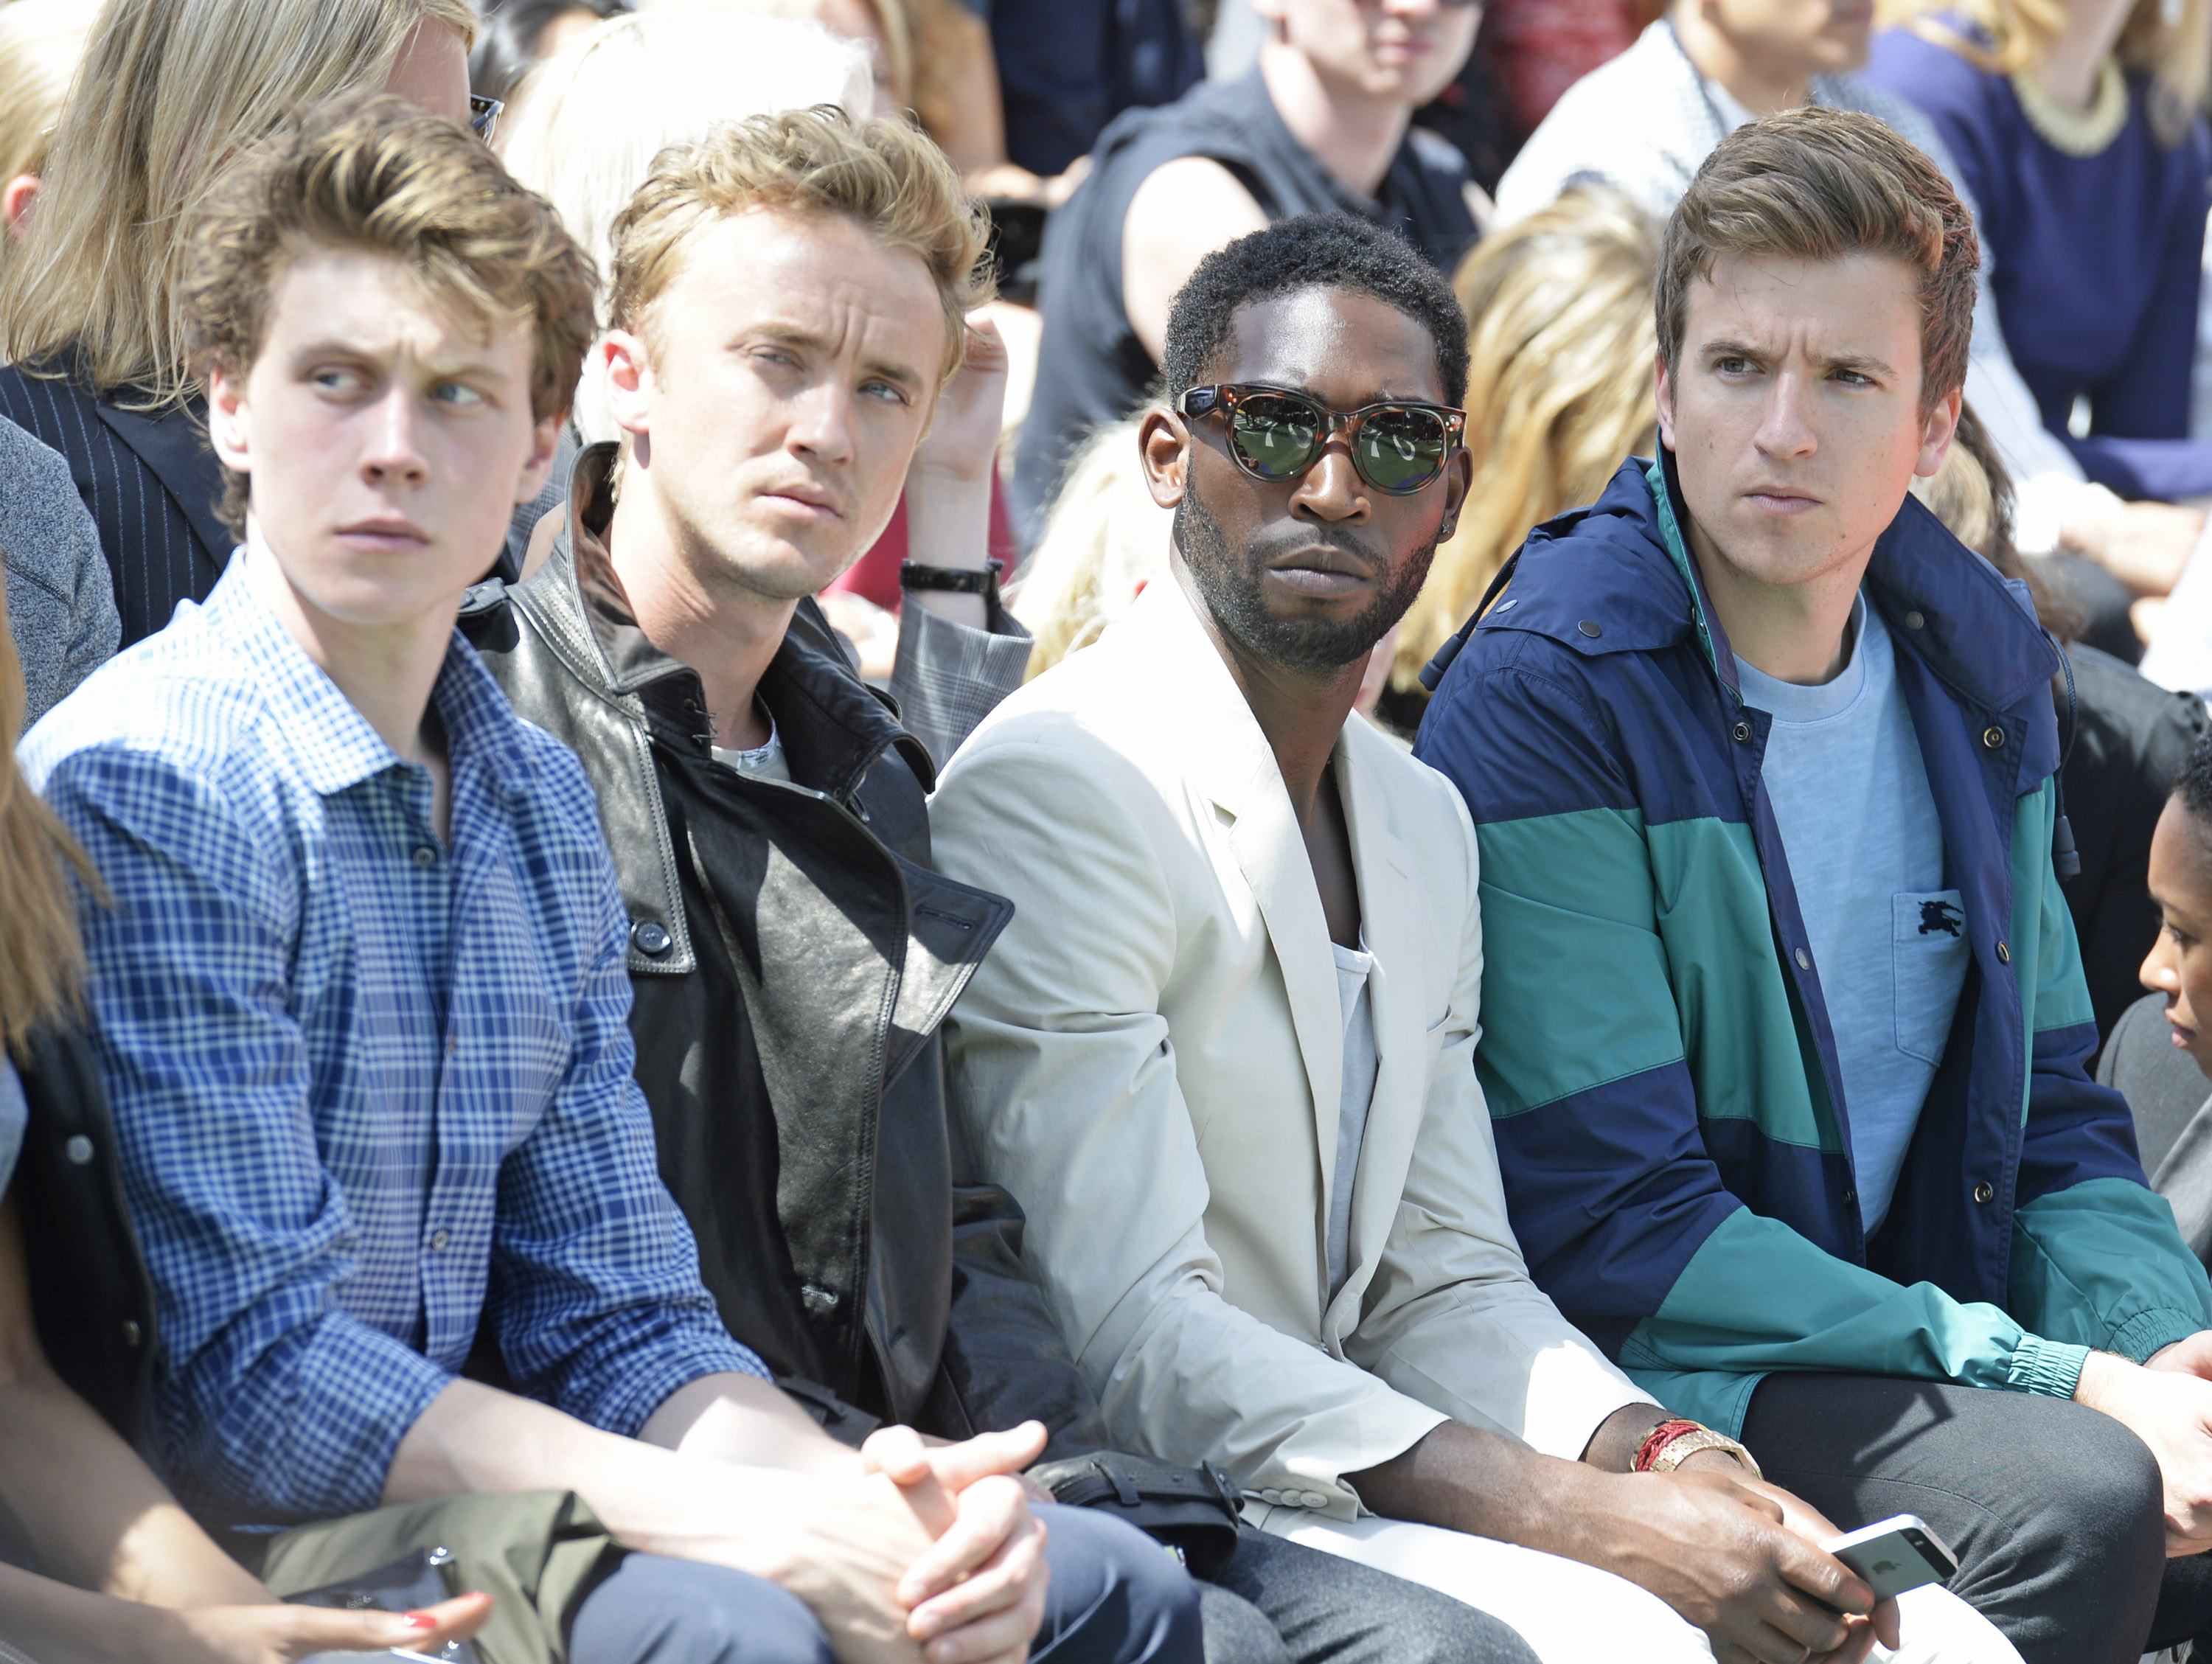 Burberry Prorsum SS15: Front Row & Runway - London Collections: Men